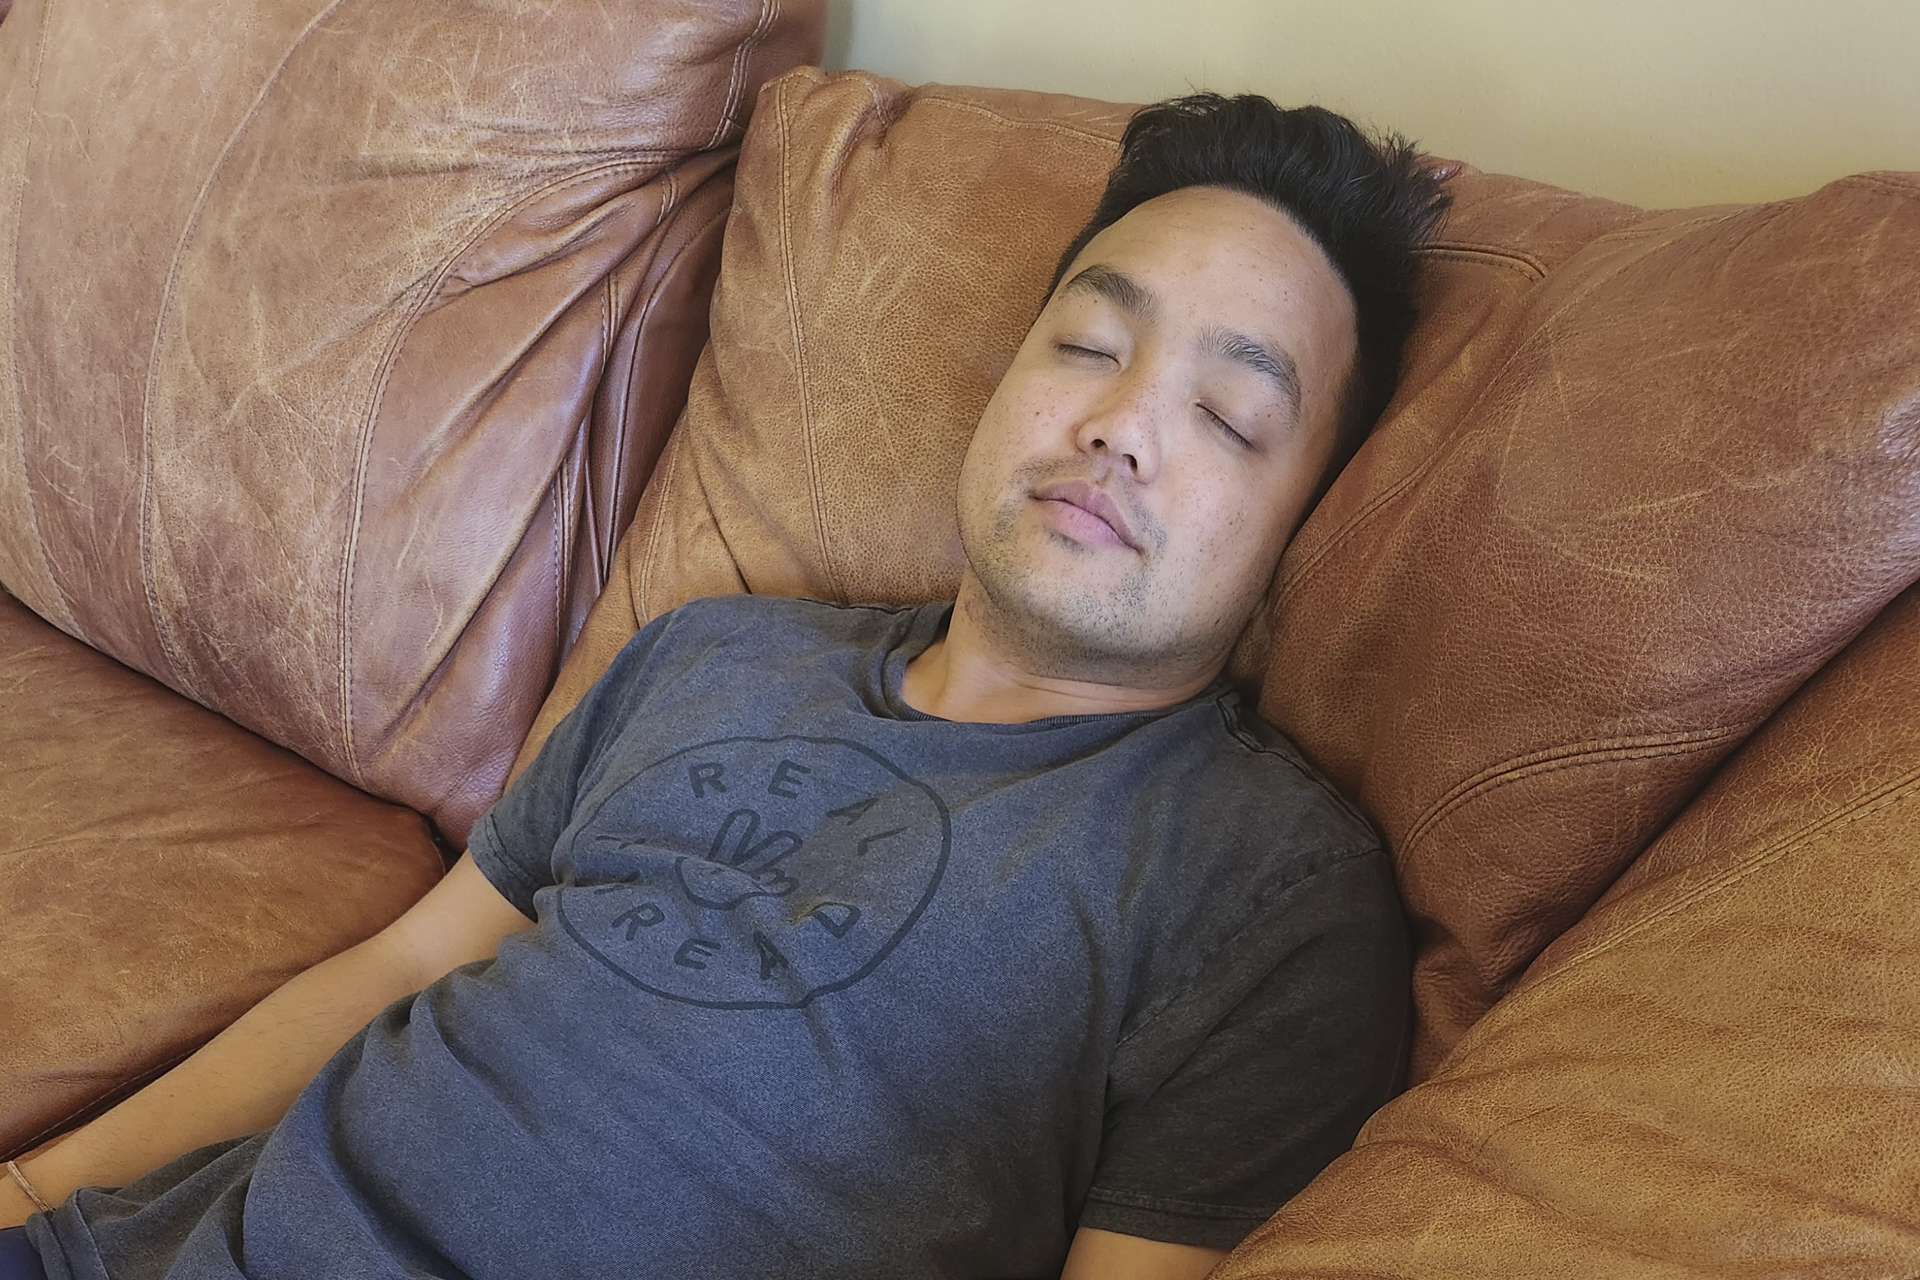 A young Asian man in a gray T-shirt rests on a brown leather couch with his eyes closed.